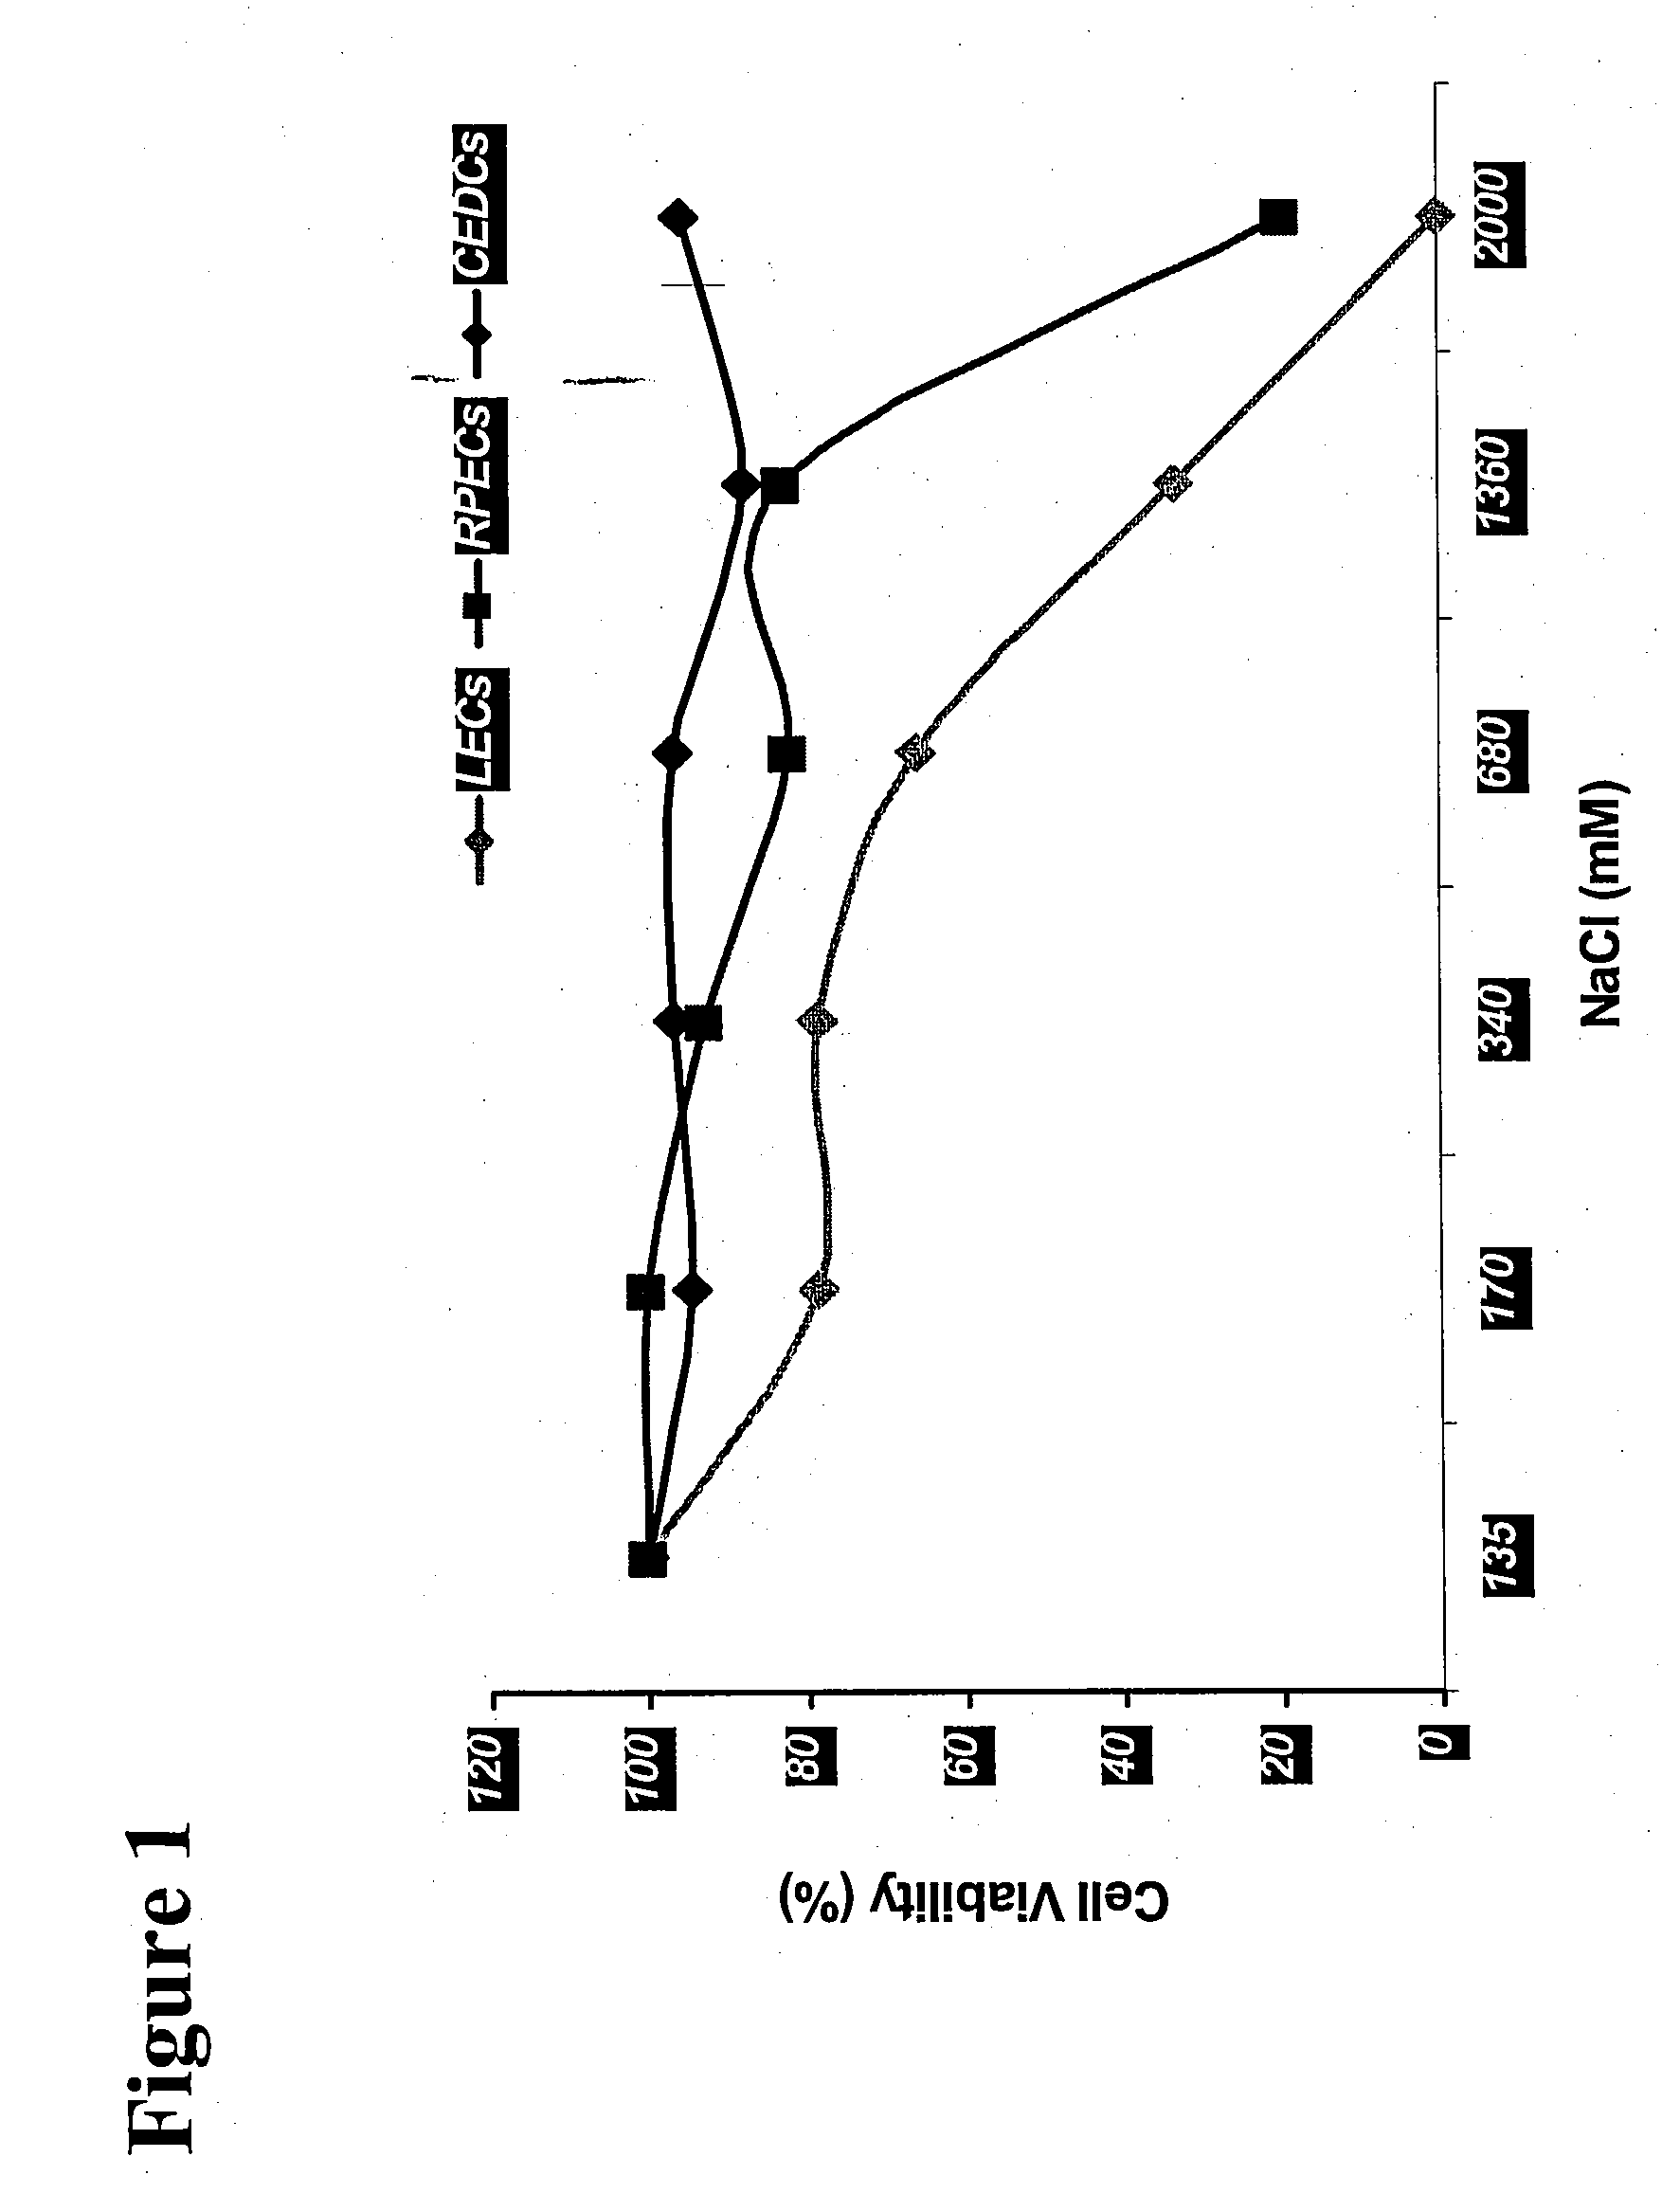 Treatment Solution and Method for Preventing Posterior Capsular Opacification by Selectively Inducing Detachment And/Or Death of Lens Epithelial Cells